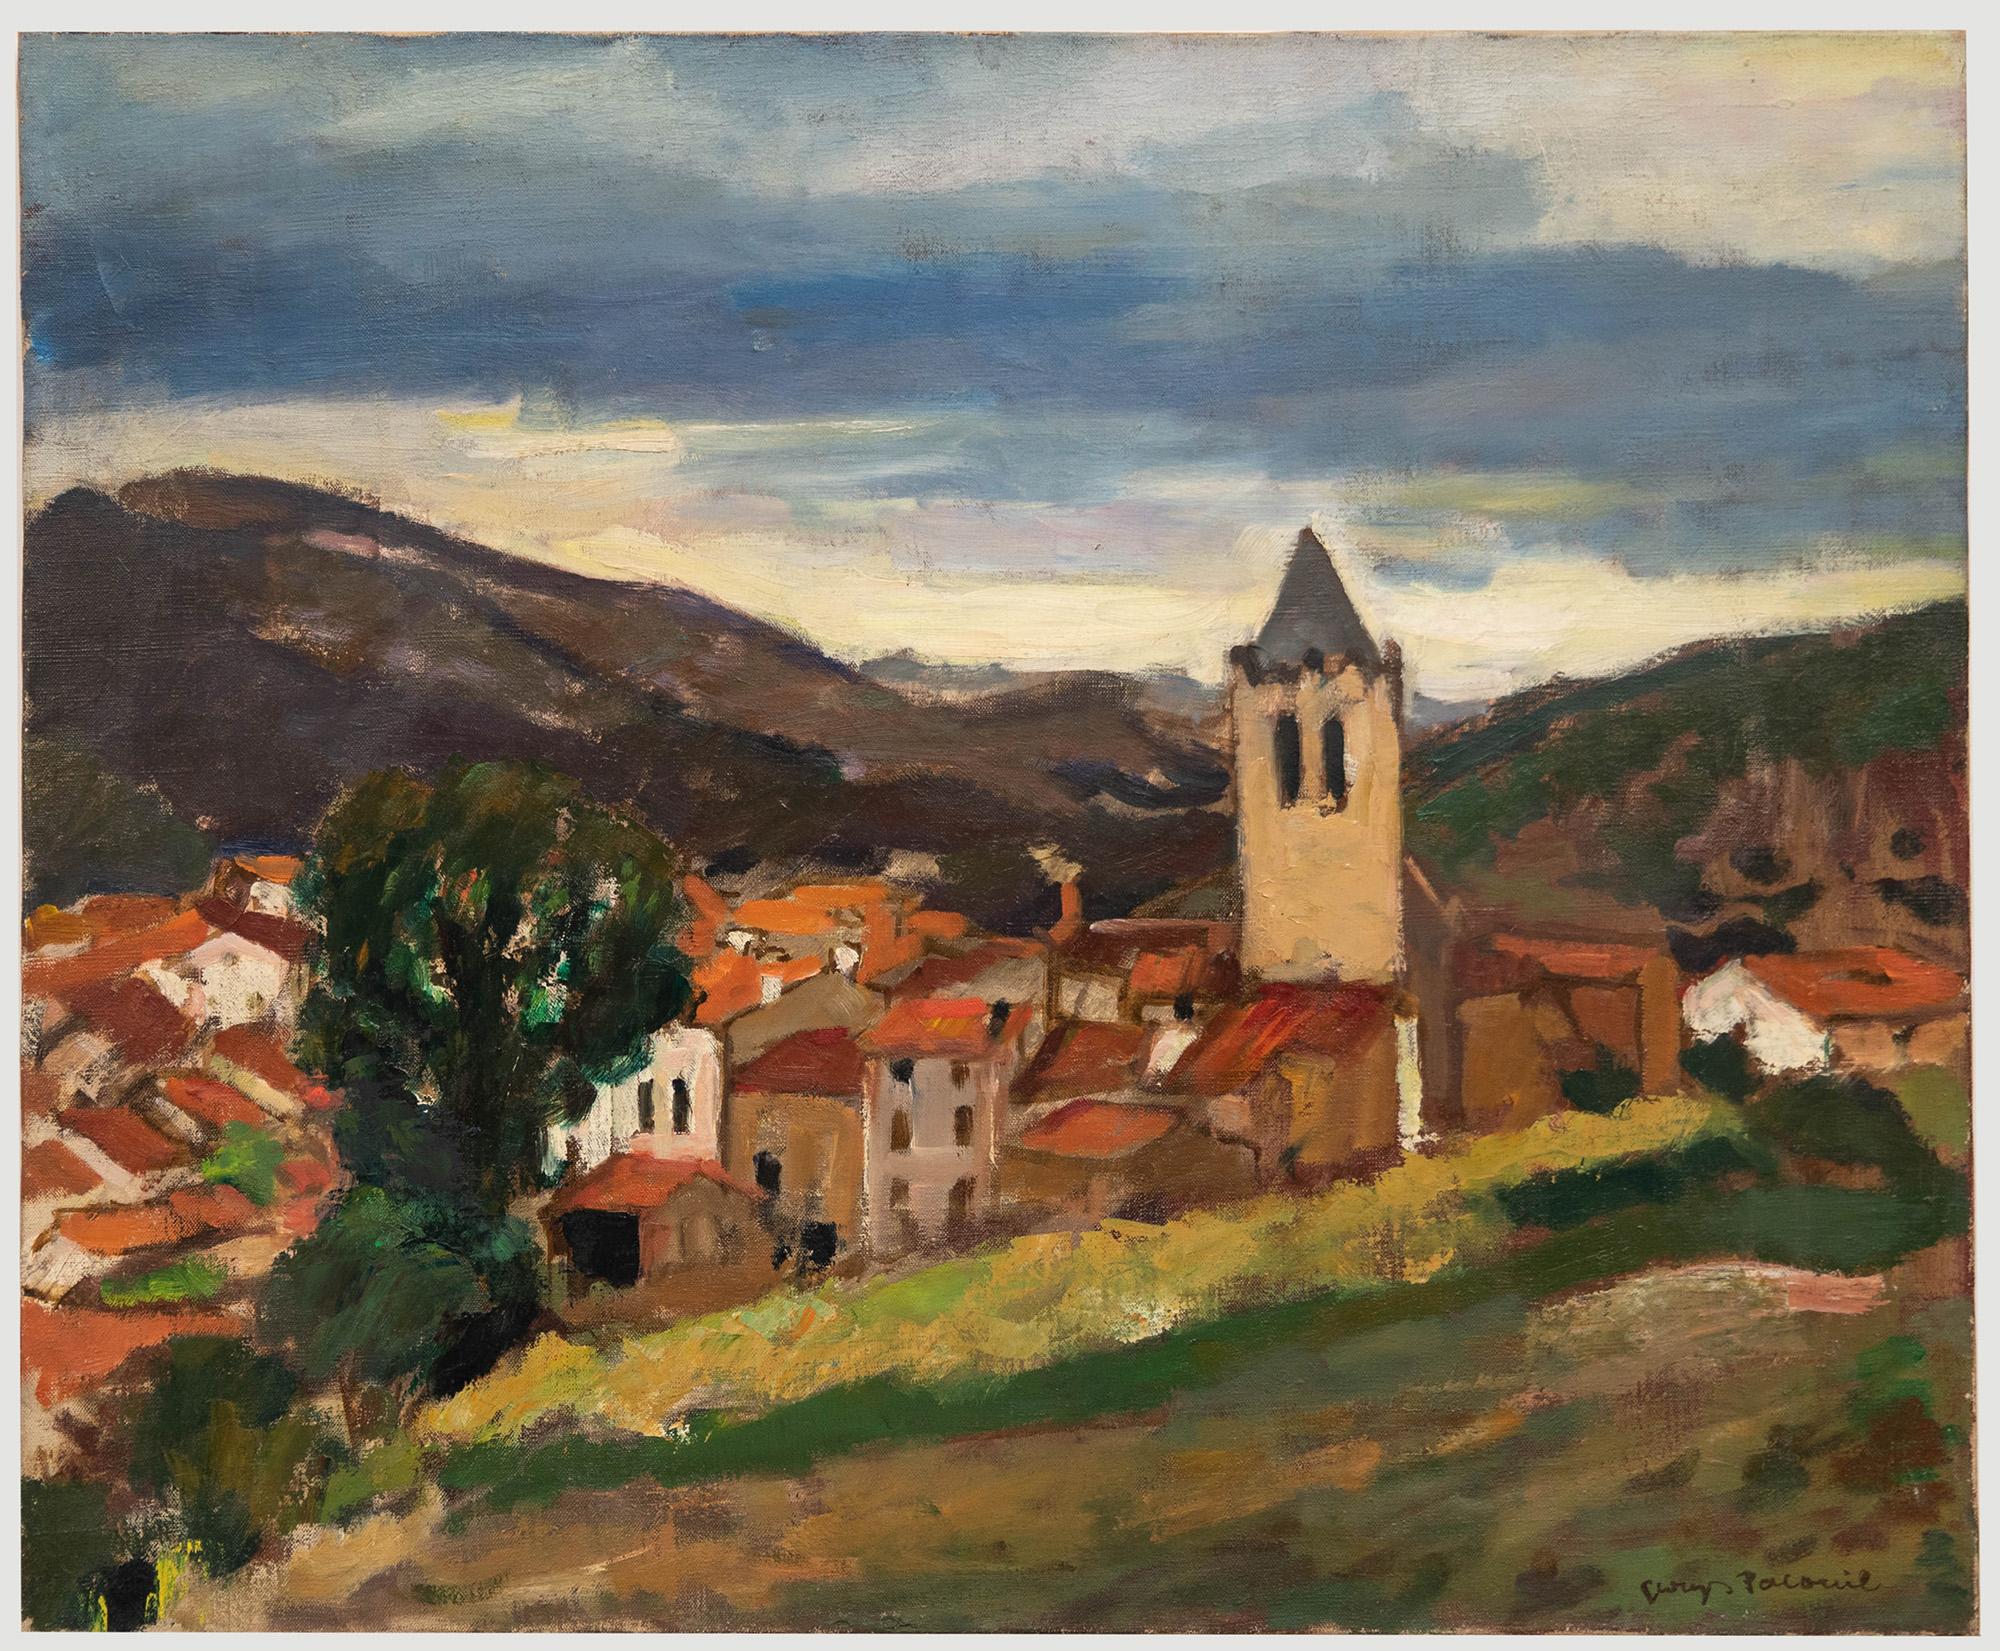 Unknown Landscape Painting - Georges Pacouil (1903-1996) - Mid 20th Century Oil, Oms, France